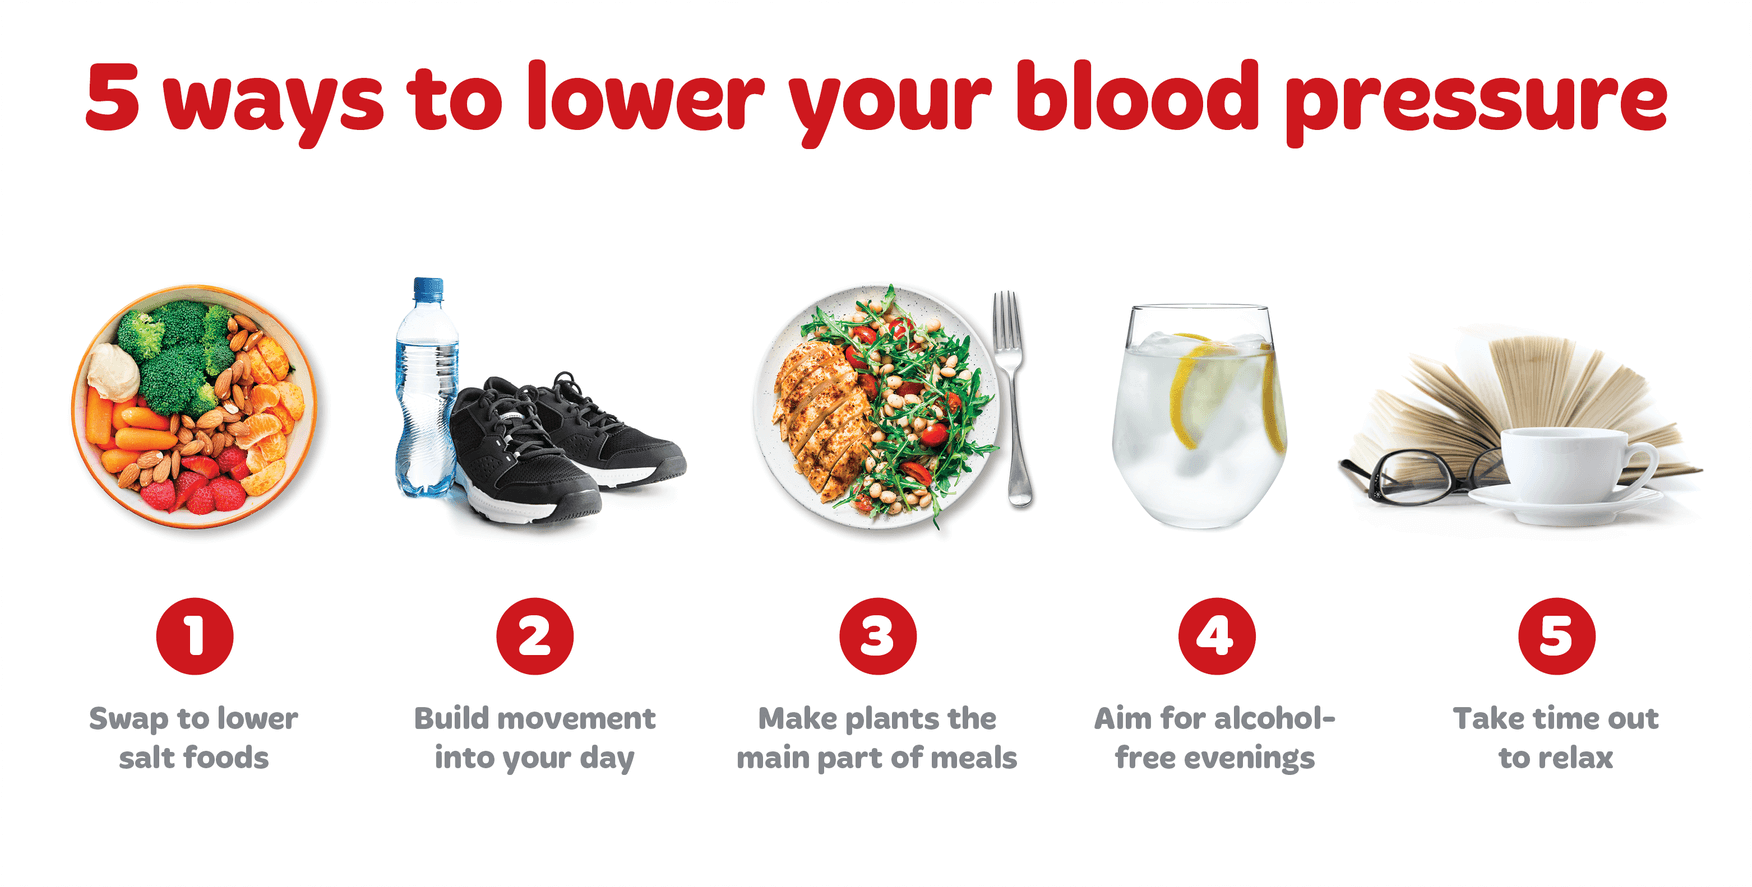 5 ways to lower your blood pressure - 1. swap to lower salt foods 2. build movement into your day 3.make plants the main part of meals 4. aim for alcohol-free evenings 5.take tike out to relax